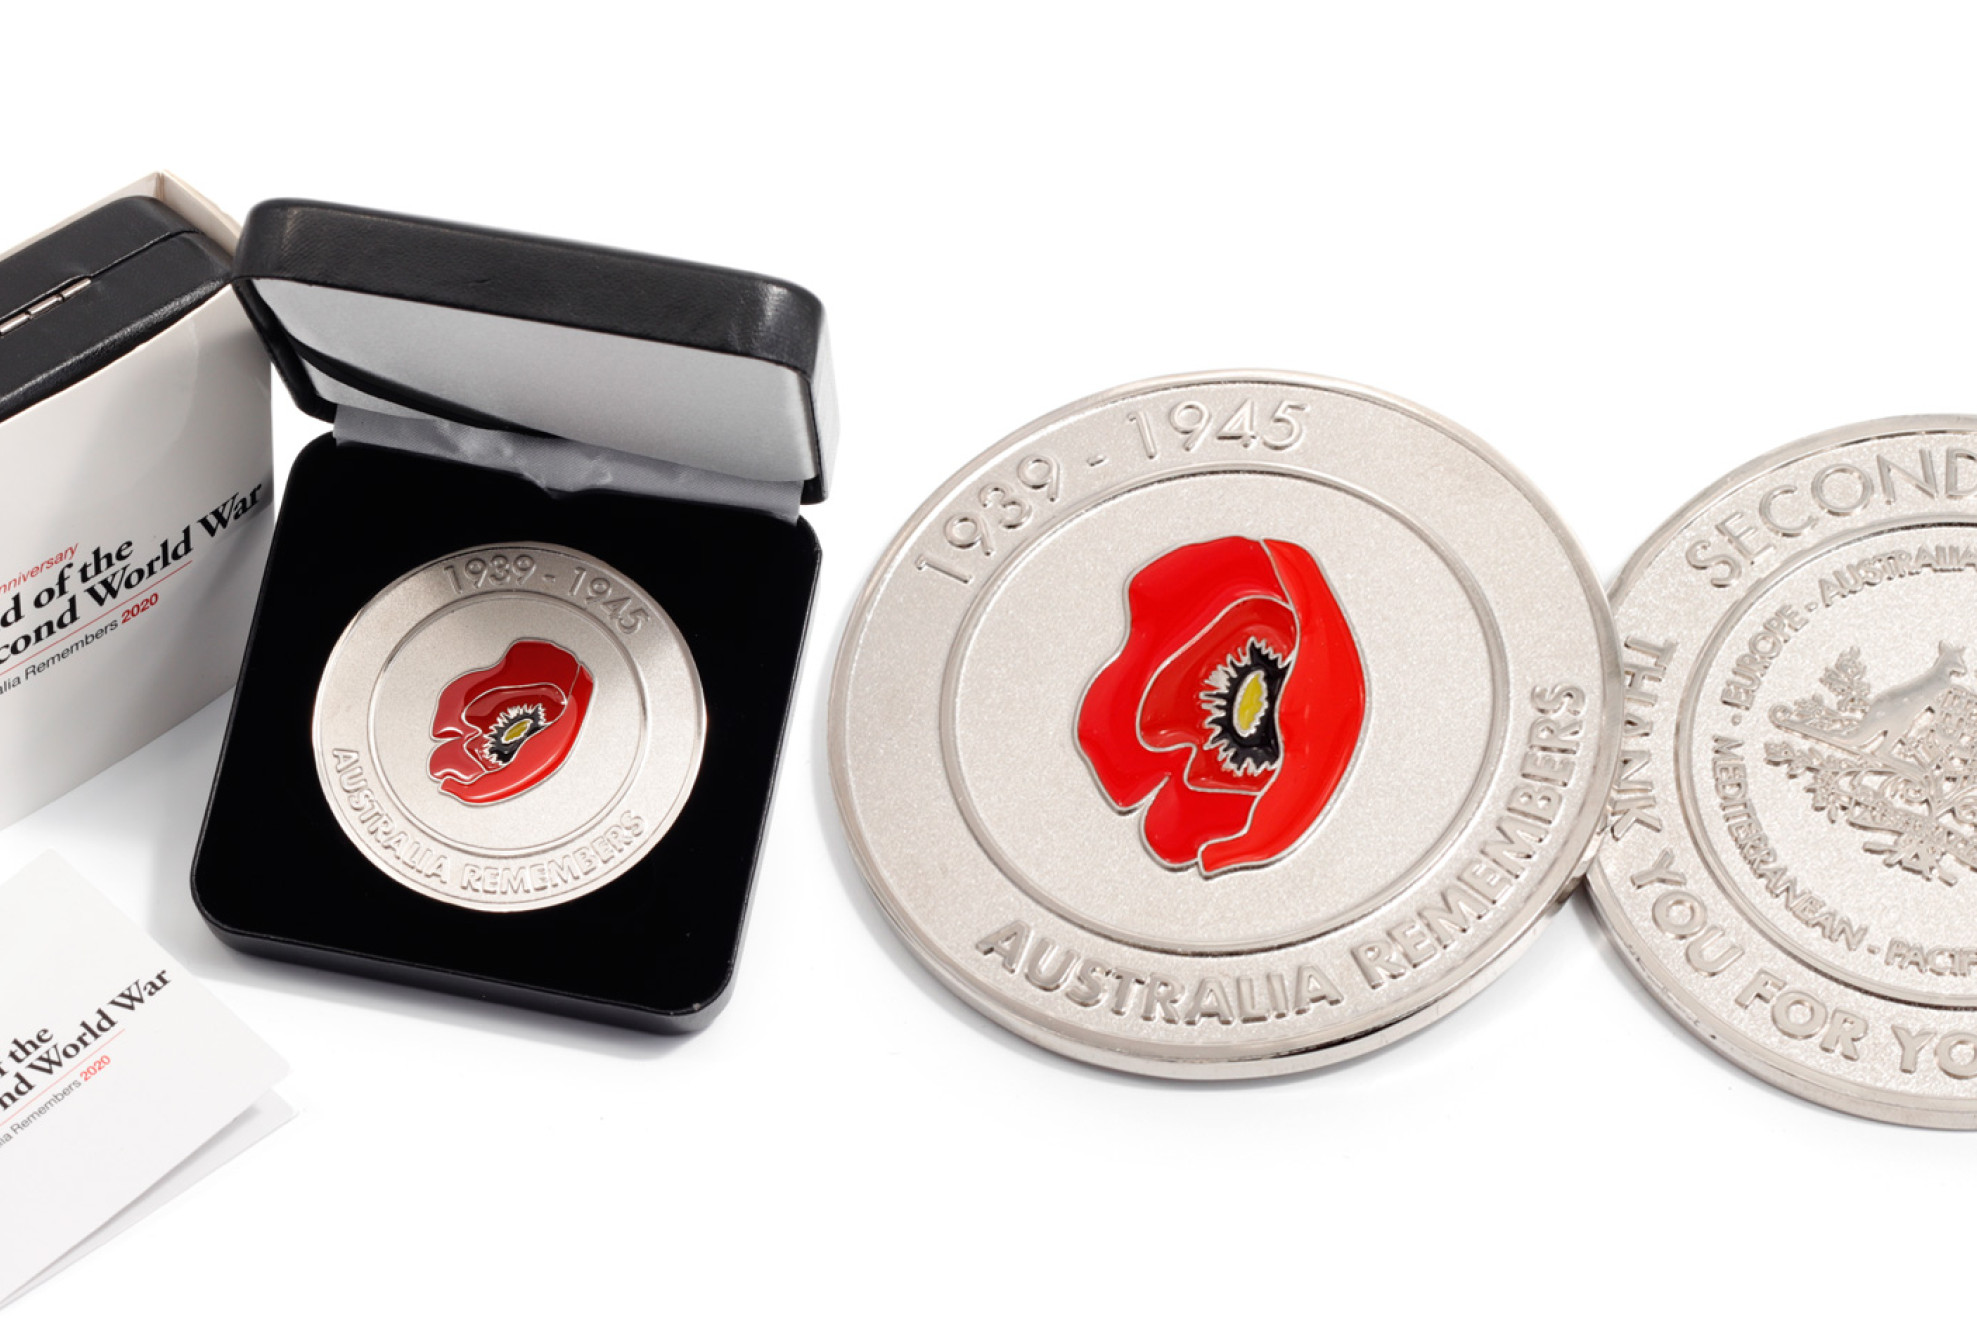 Special medallion for World War 2 veterans - feature photo